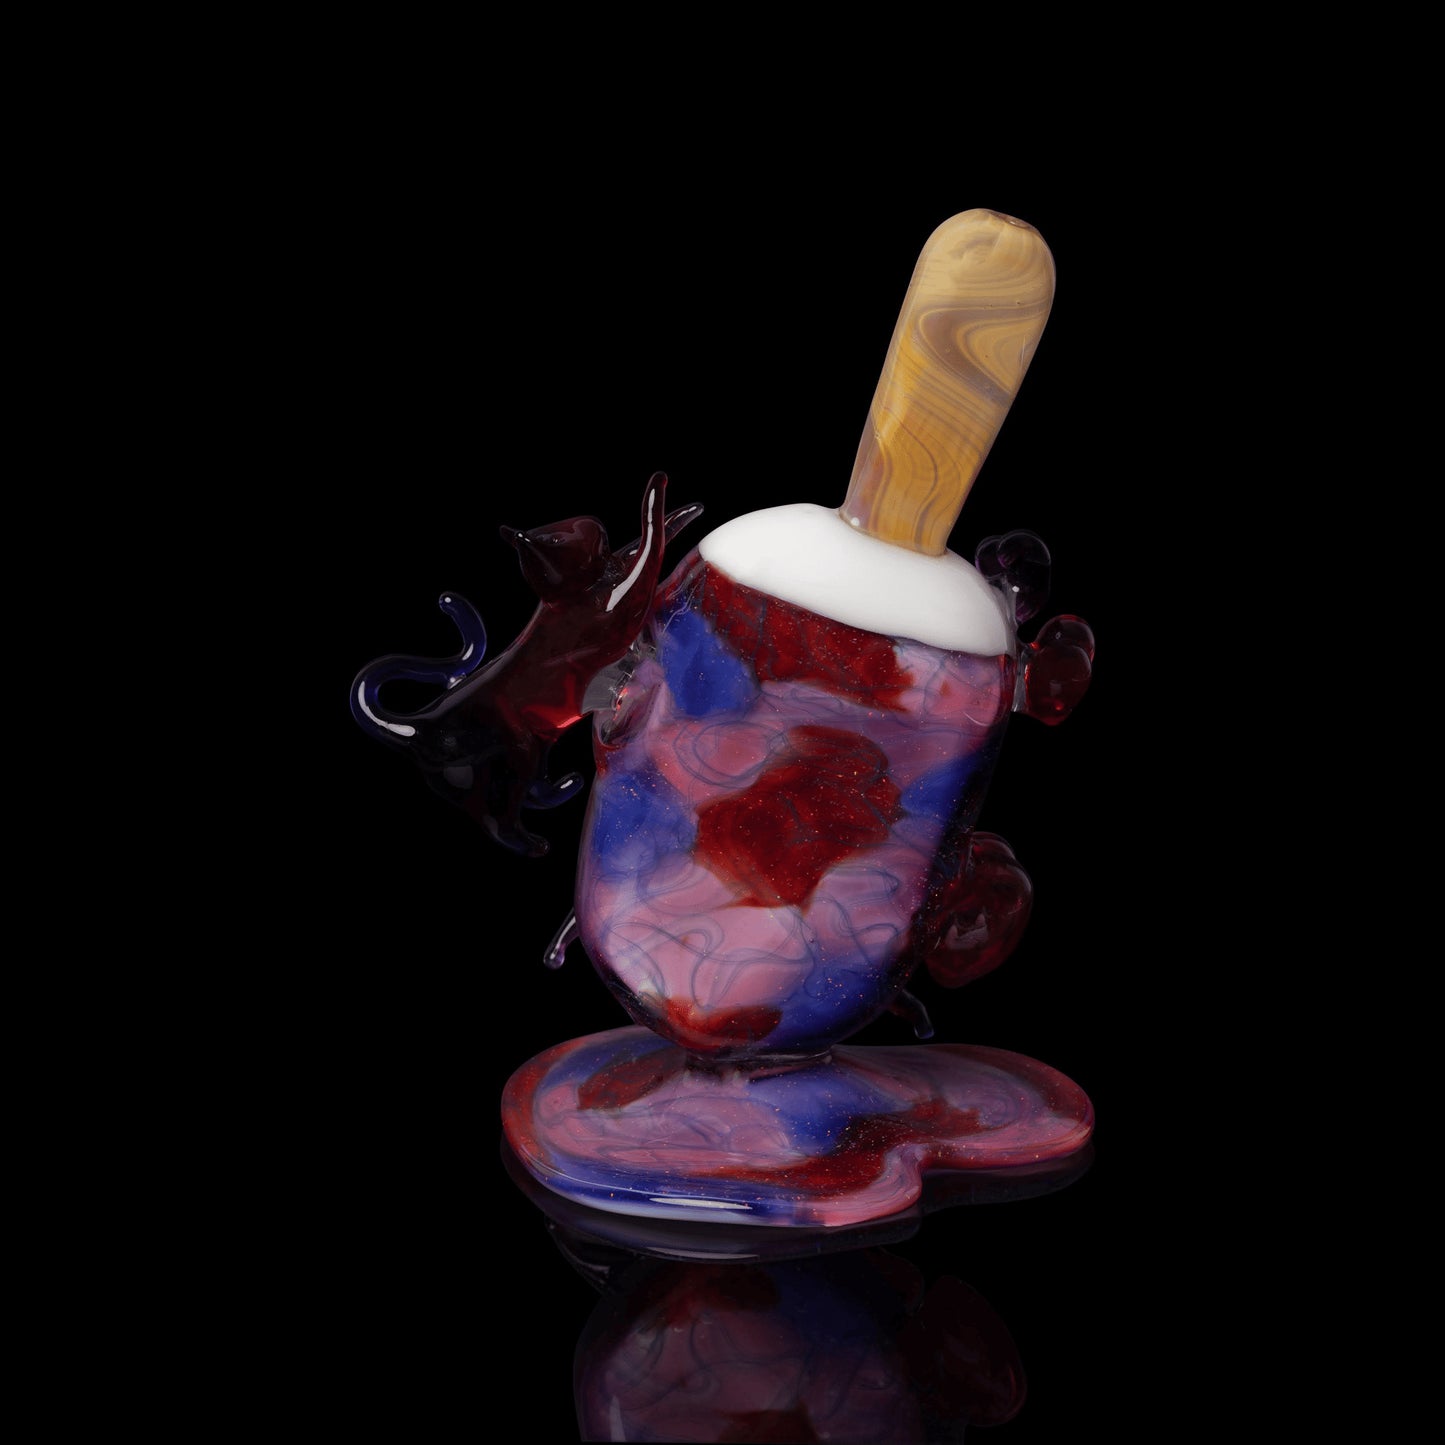 artisan-crafted design of the Collab Popsicle Rig by Sakibomb Hackysacky x Scomo Moanet (Scribble Season 2022)